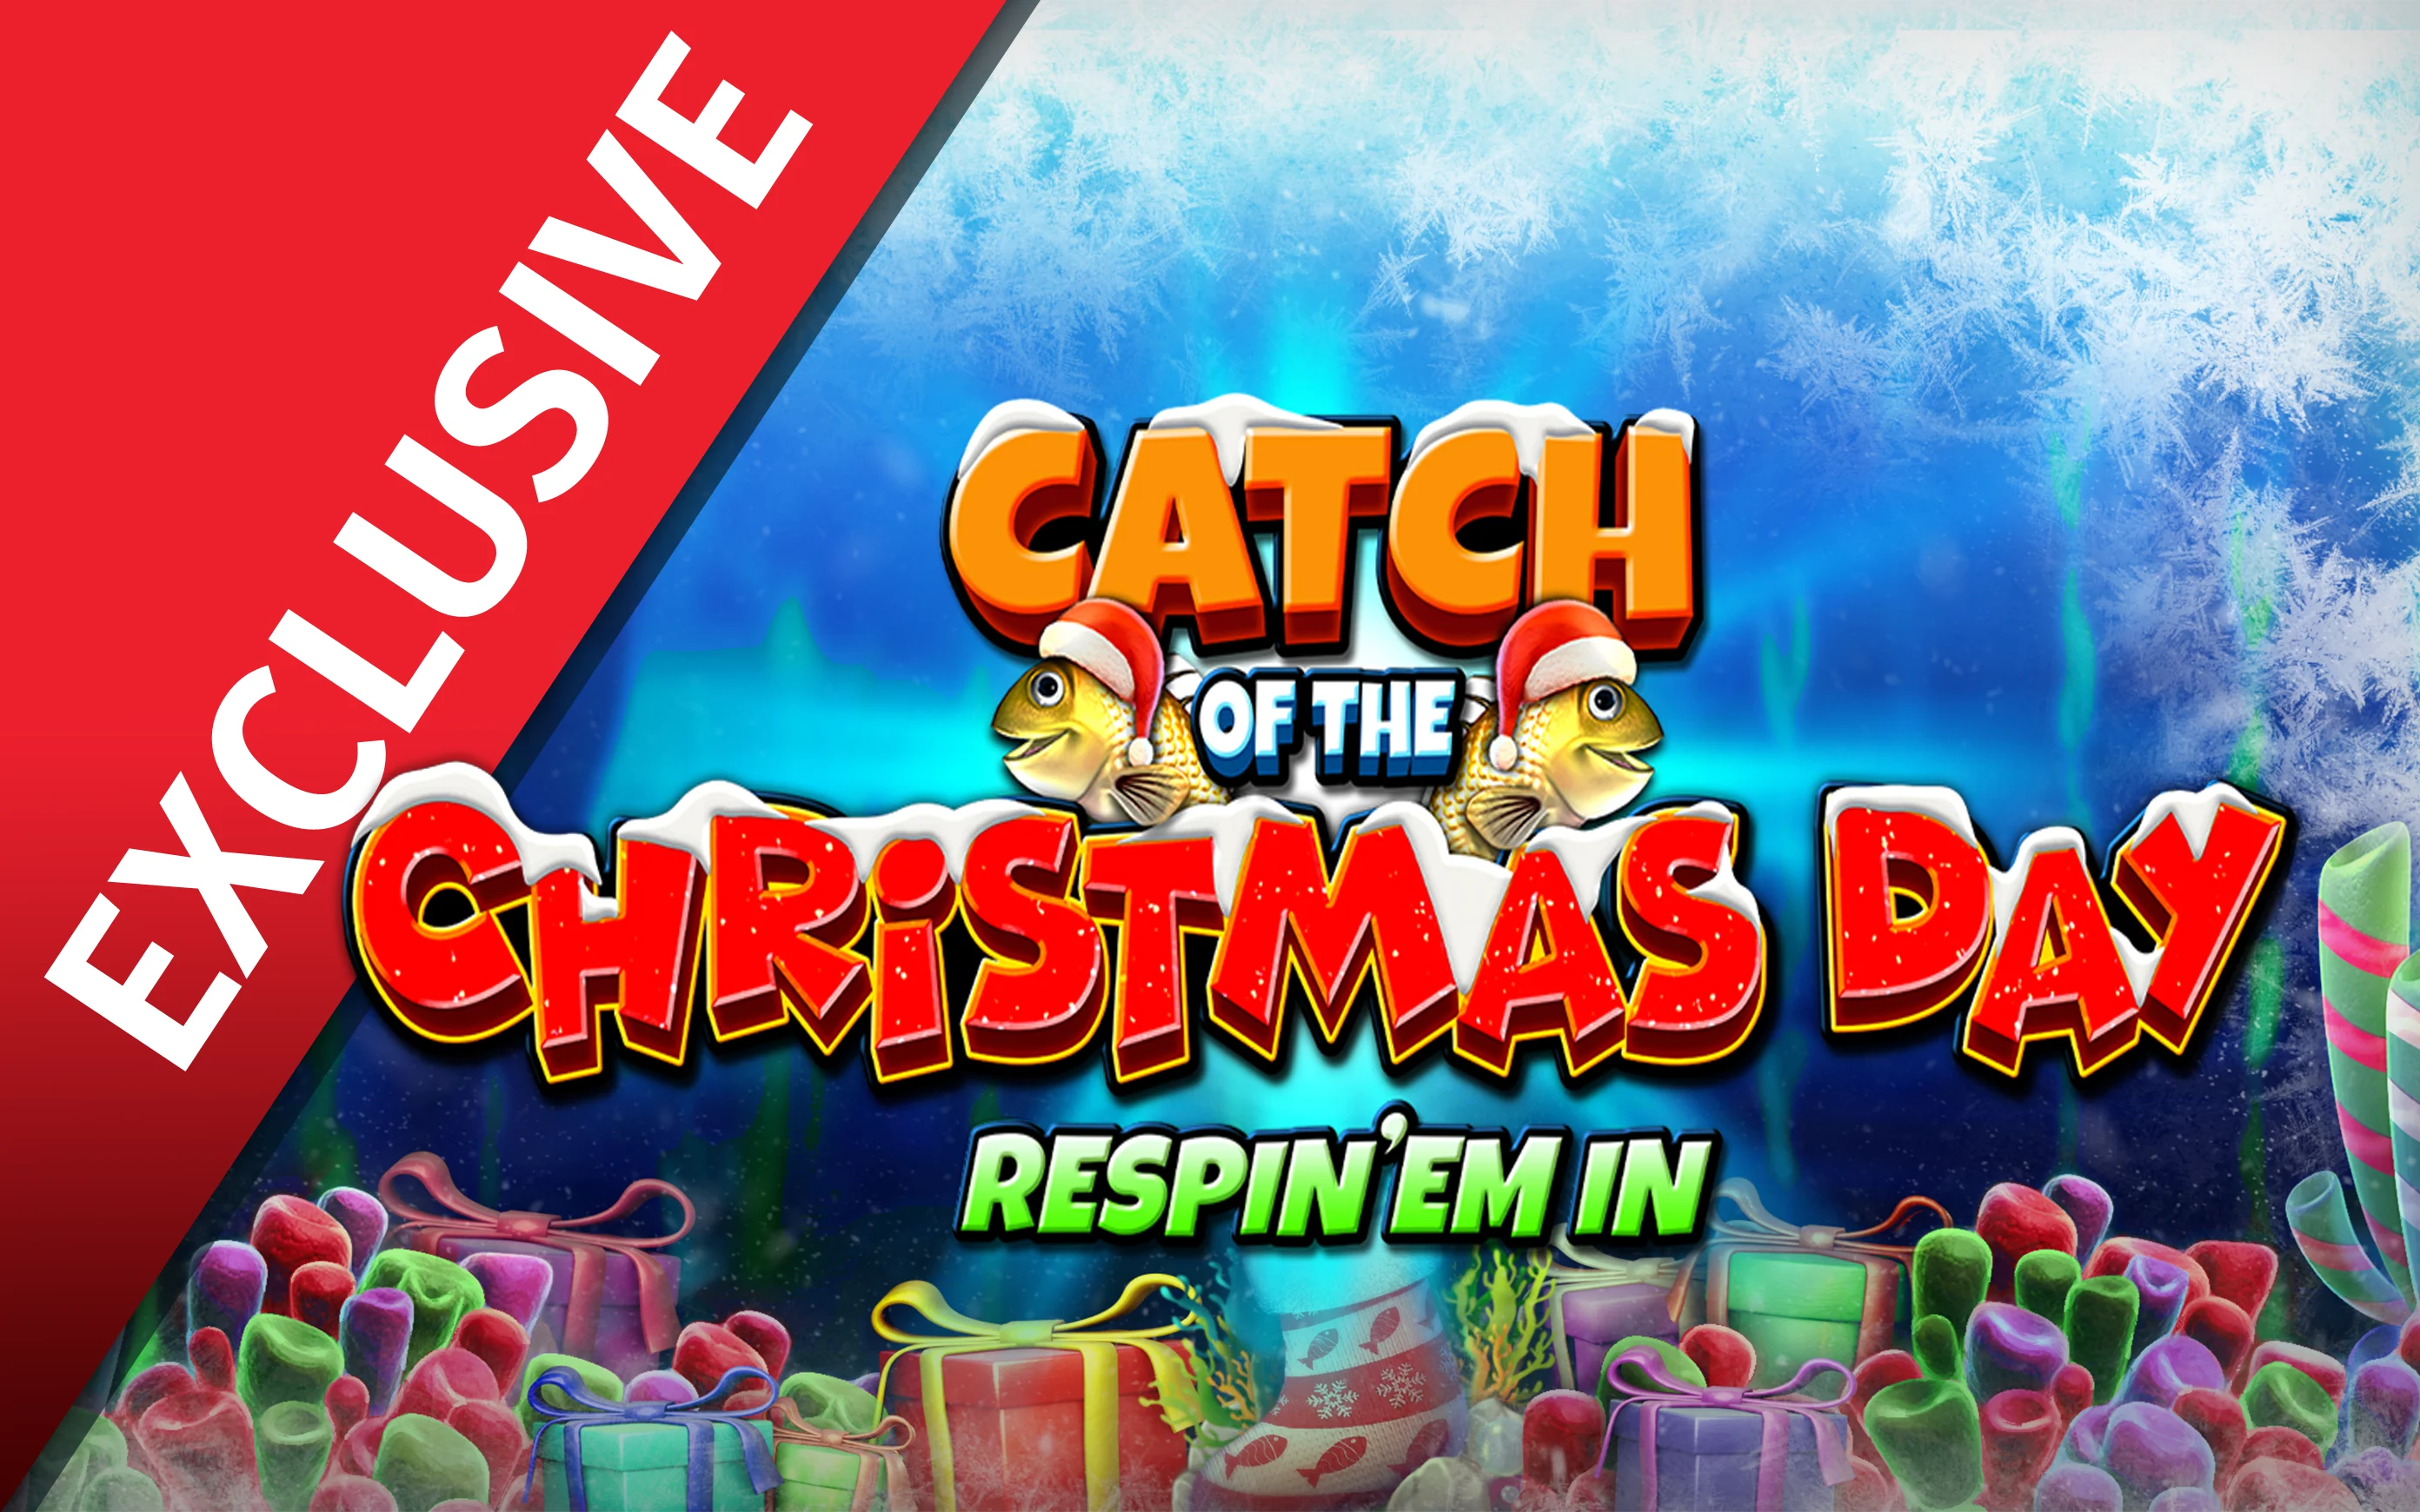 Play Catch Of The Christmas Day Respin Em In on StarcasinoBE online casino